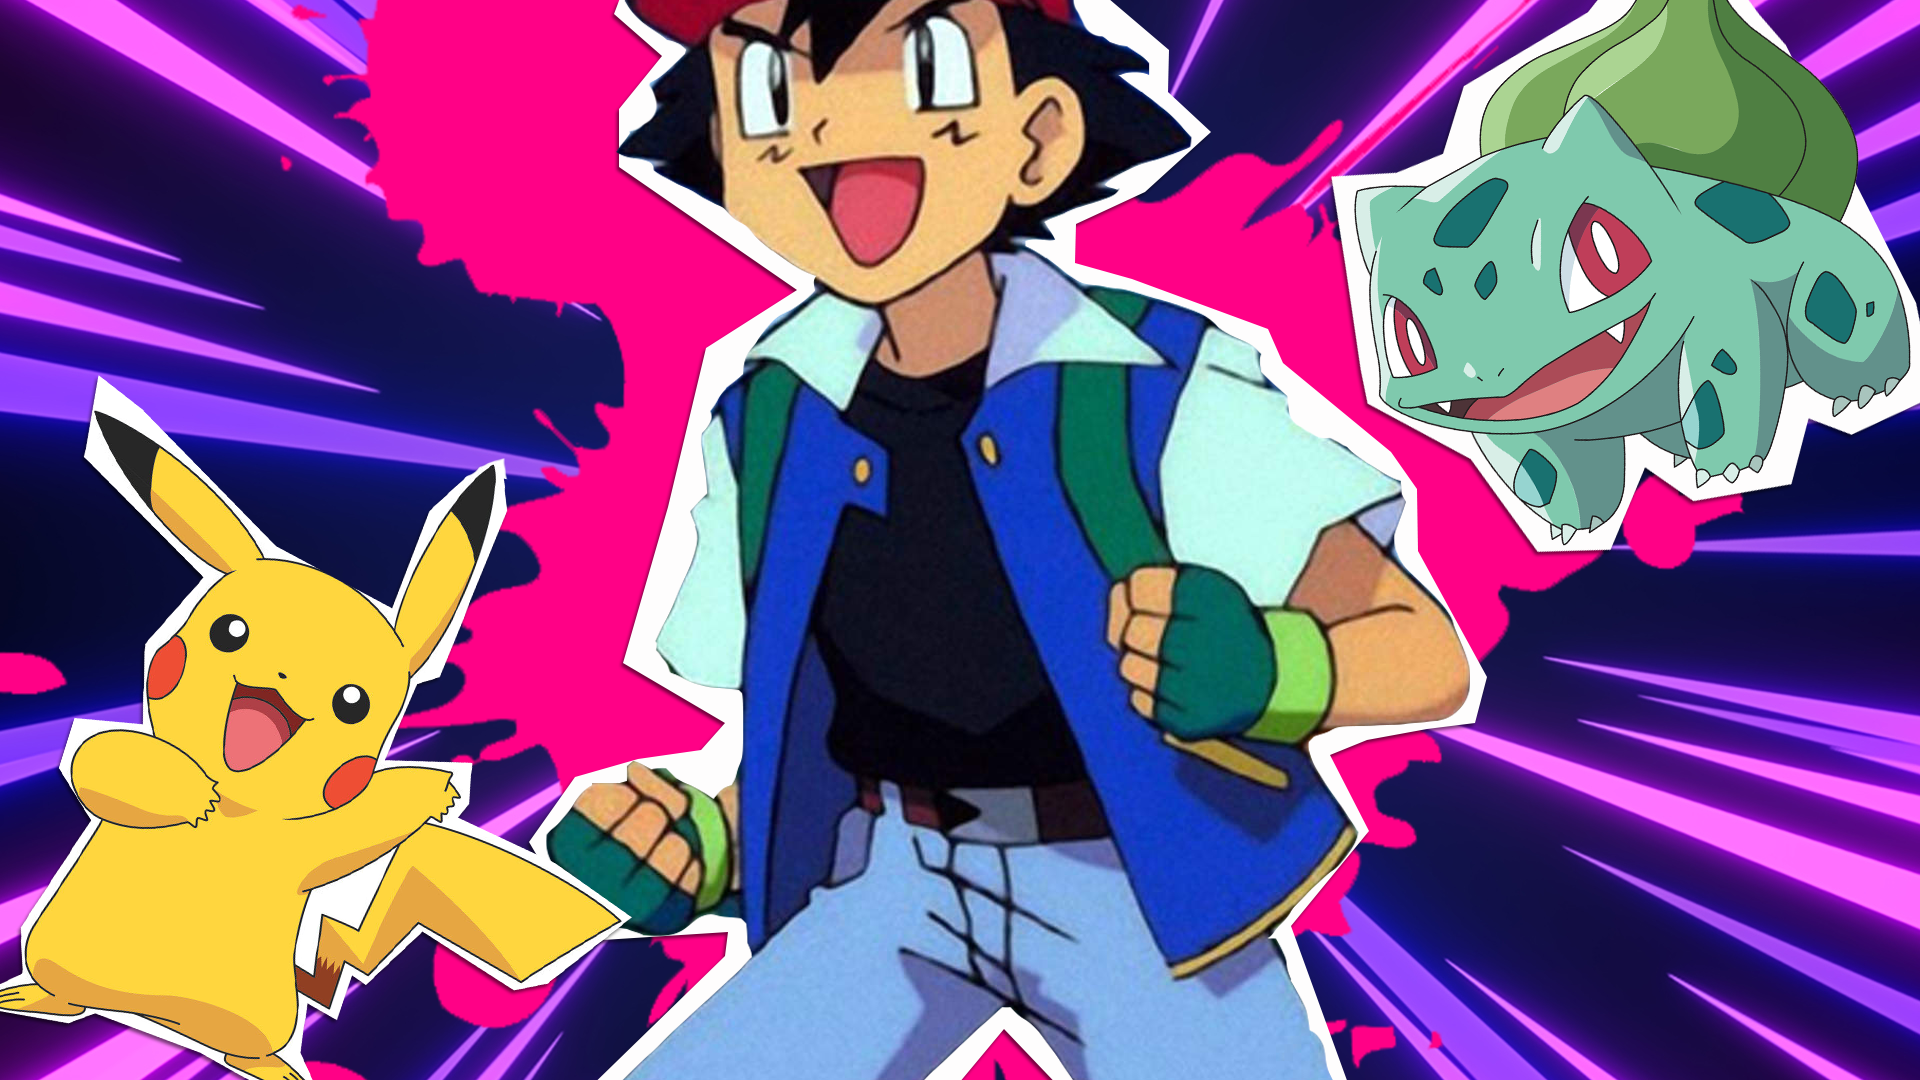 15 Anime References In 'Pokémon' You Might Have Missed